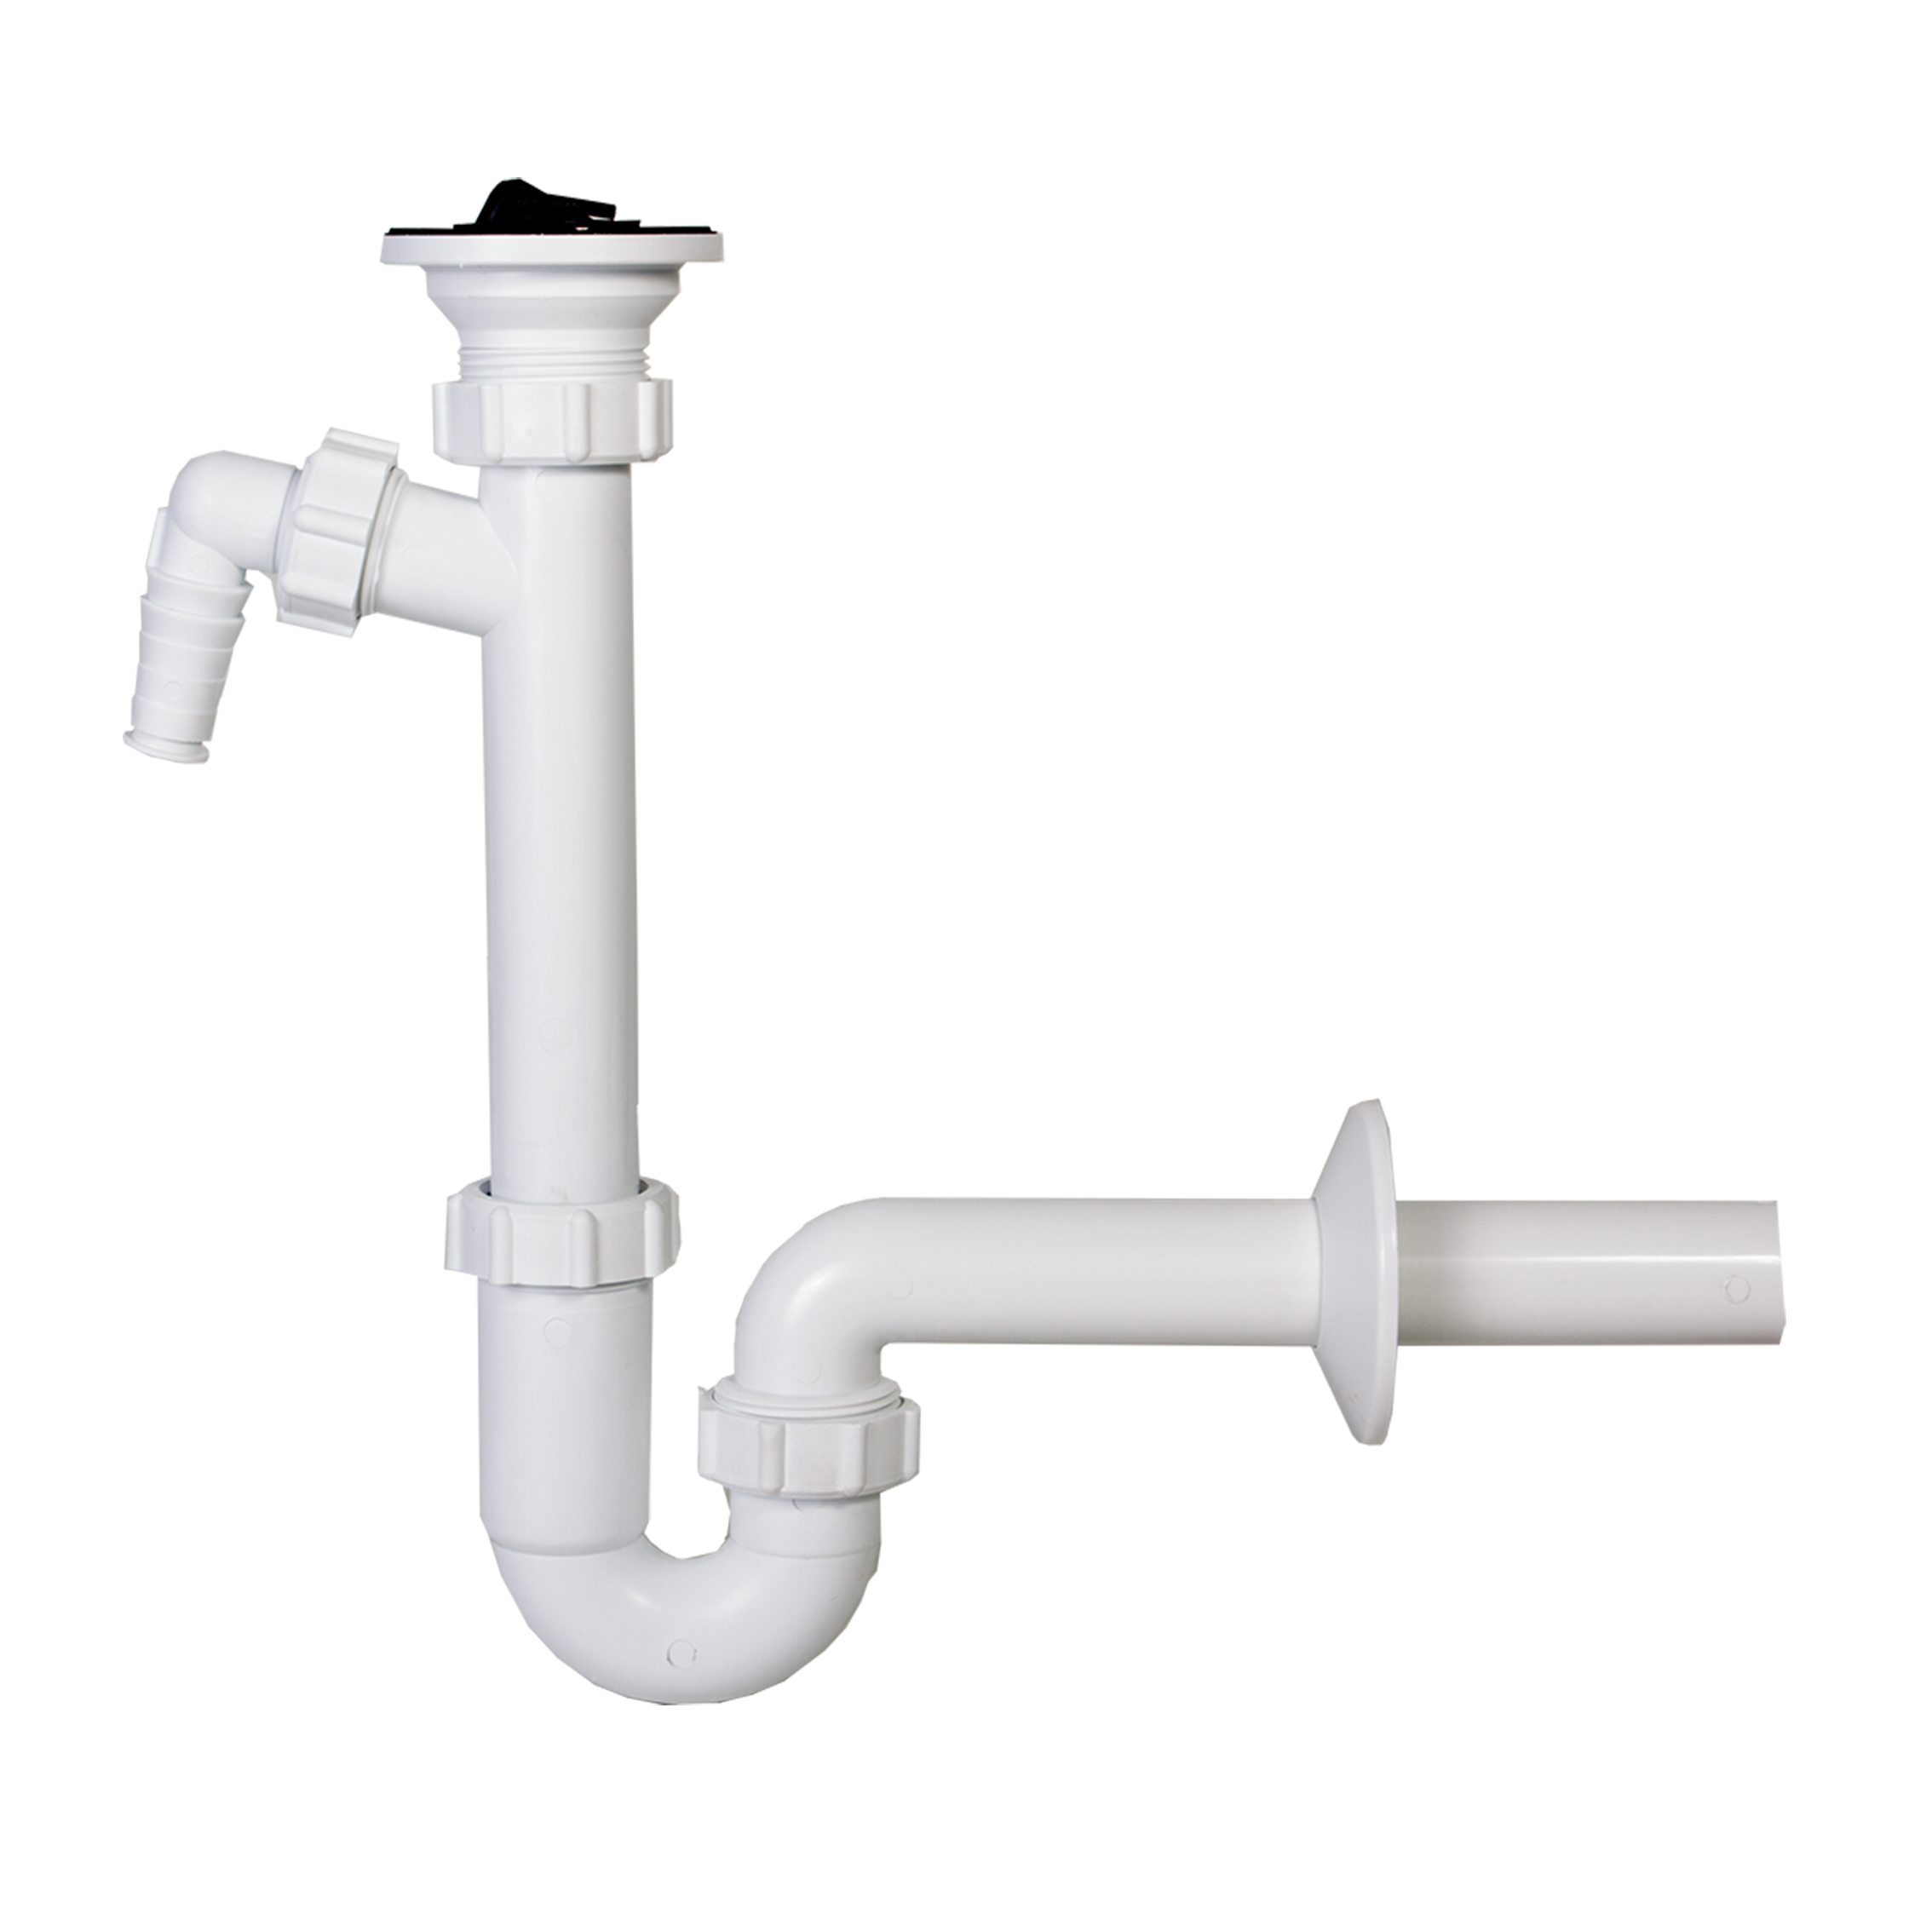 Single bowl pipe trap with sink waste, nozzle and Ø32 mm outlet